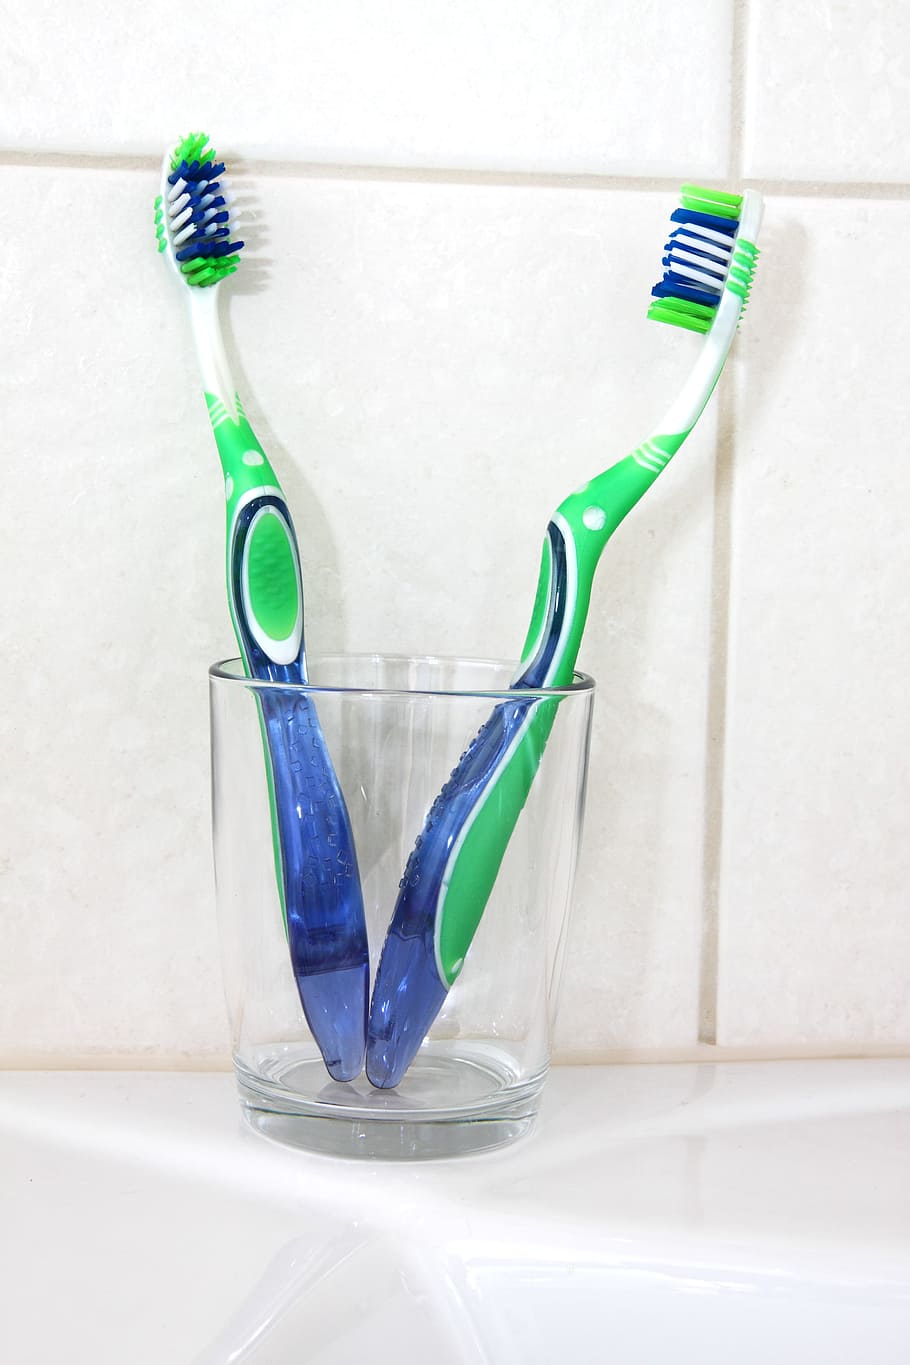 two, green, toothbrushes, glass, Bathroom, Brush, Care, Clean, Cup, dental